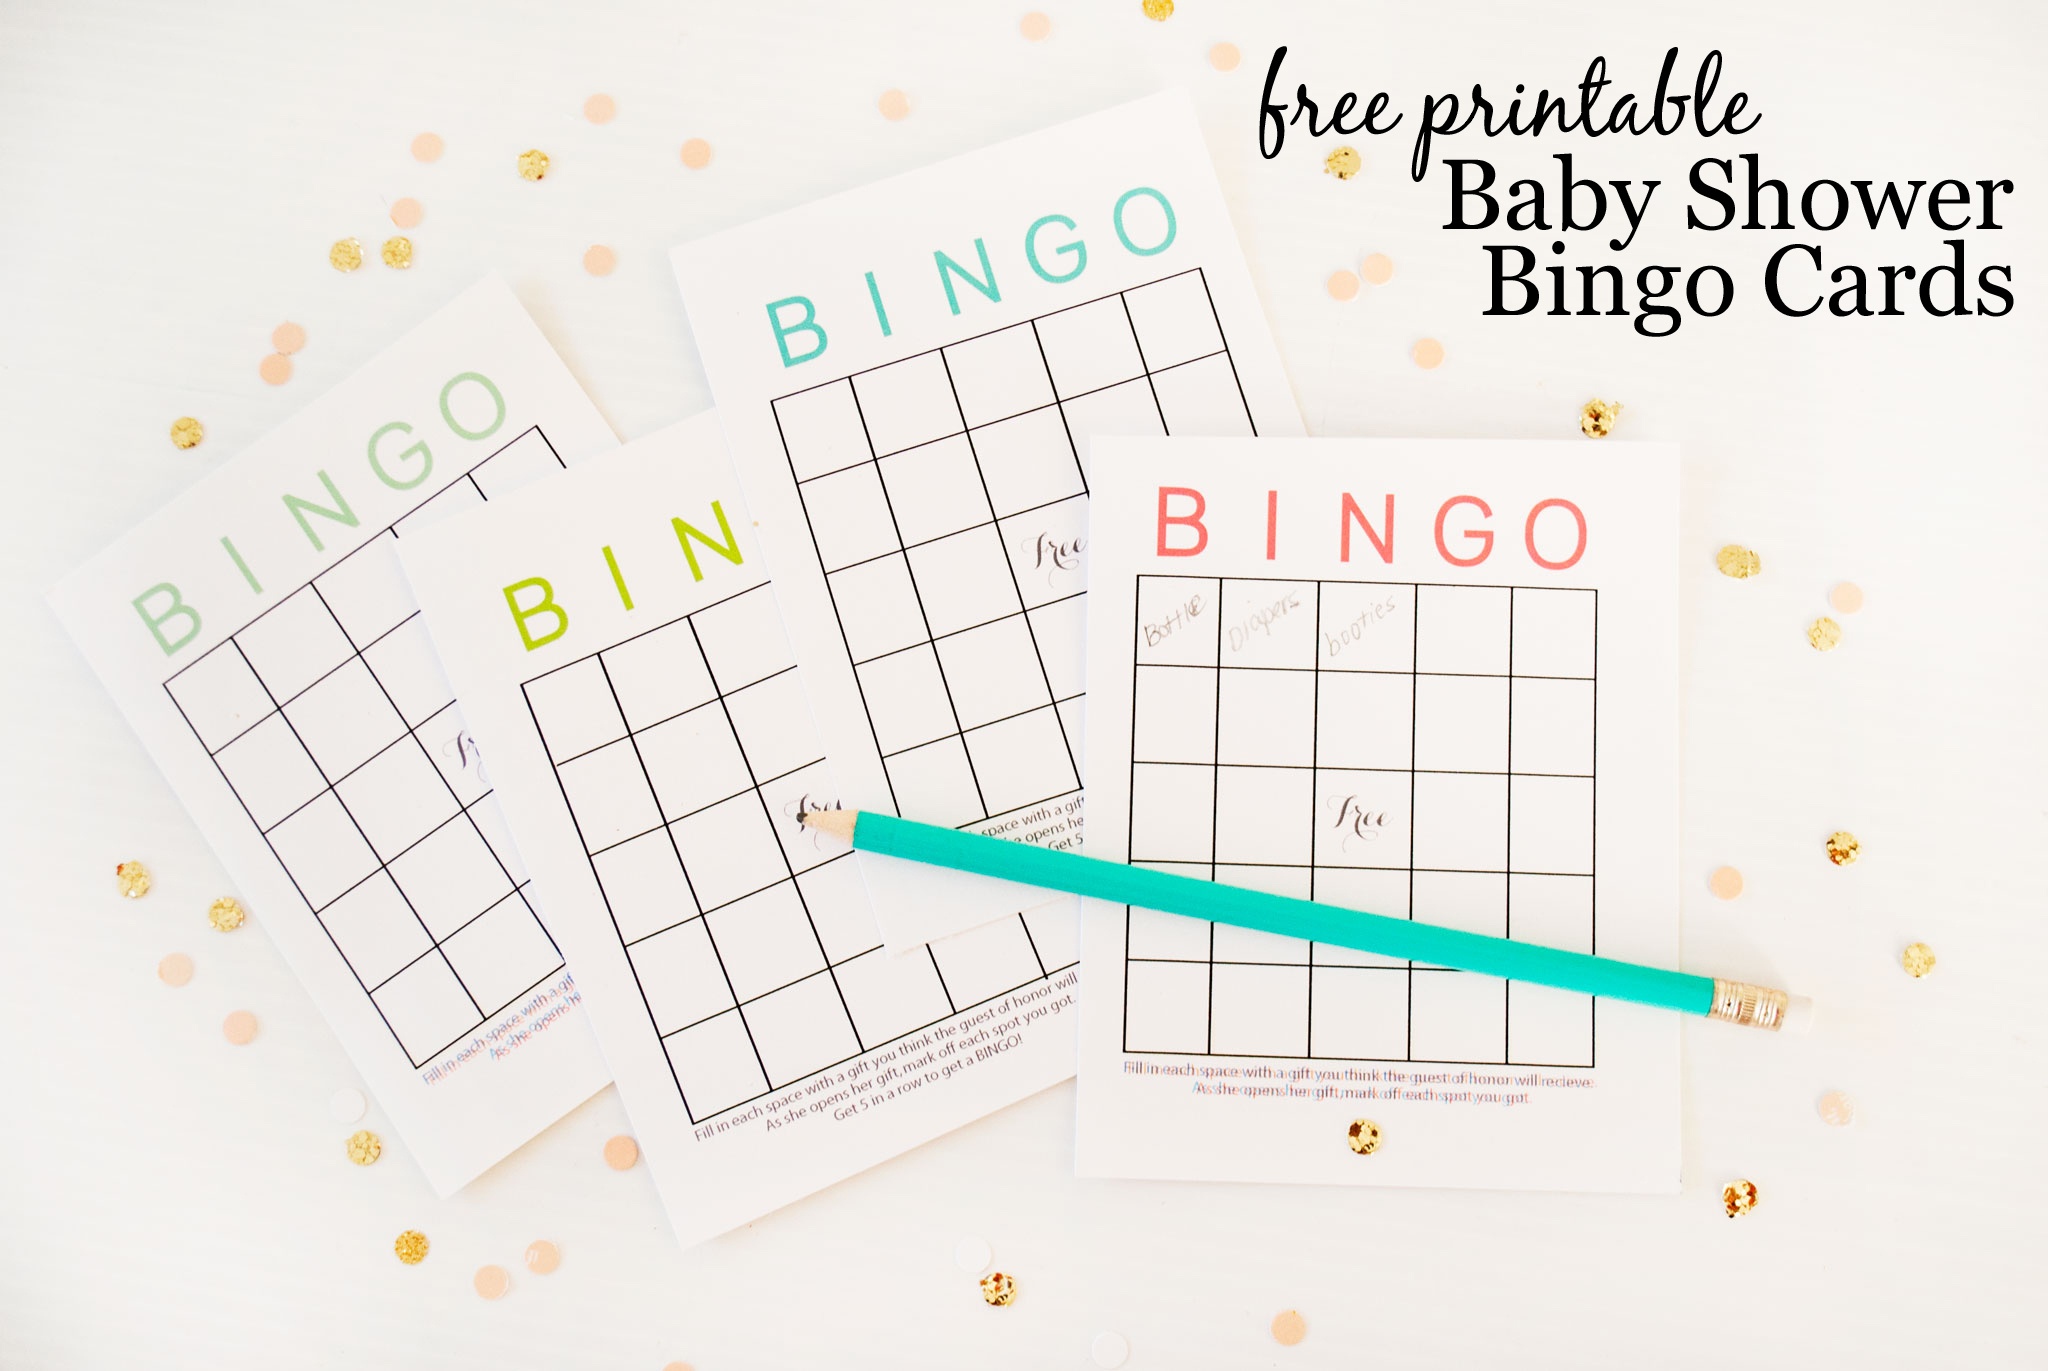 Free Printable Baby Shower Bingo Cards - Project Nursery - Free Printable Baby Shower Bingo Cards